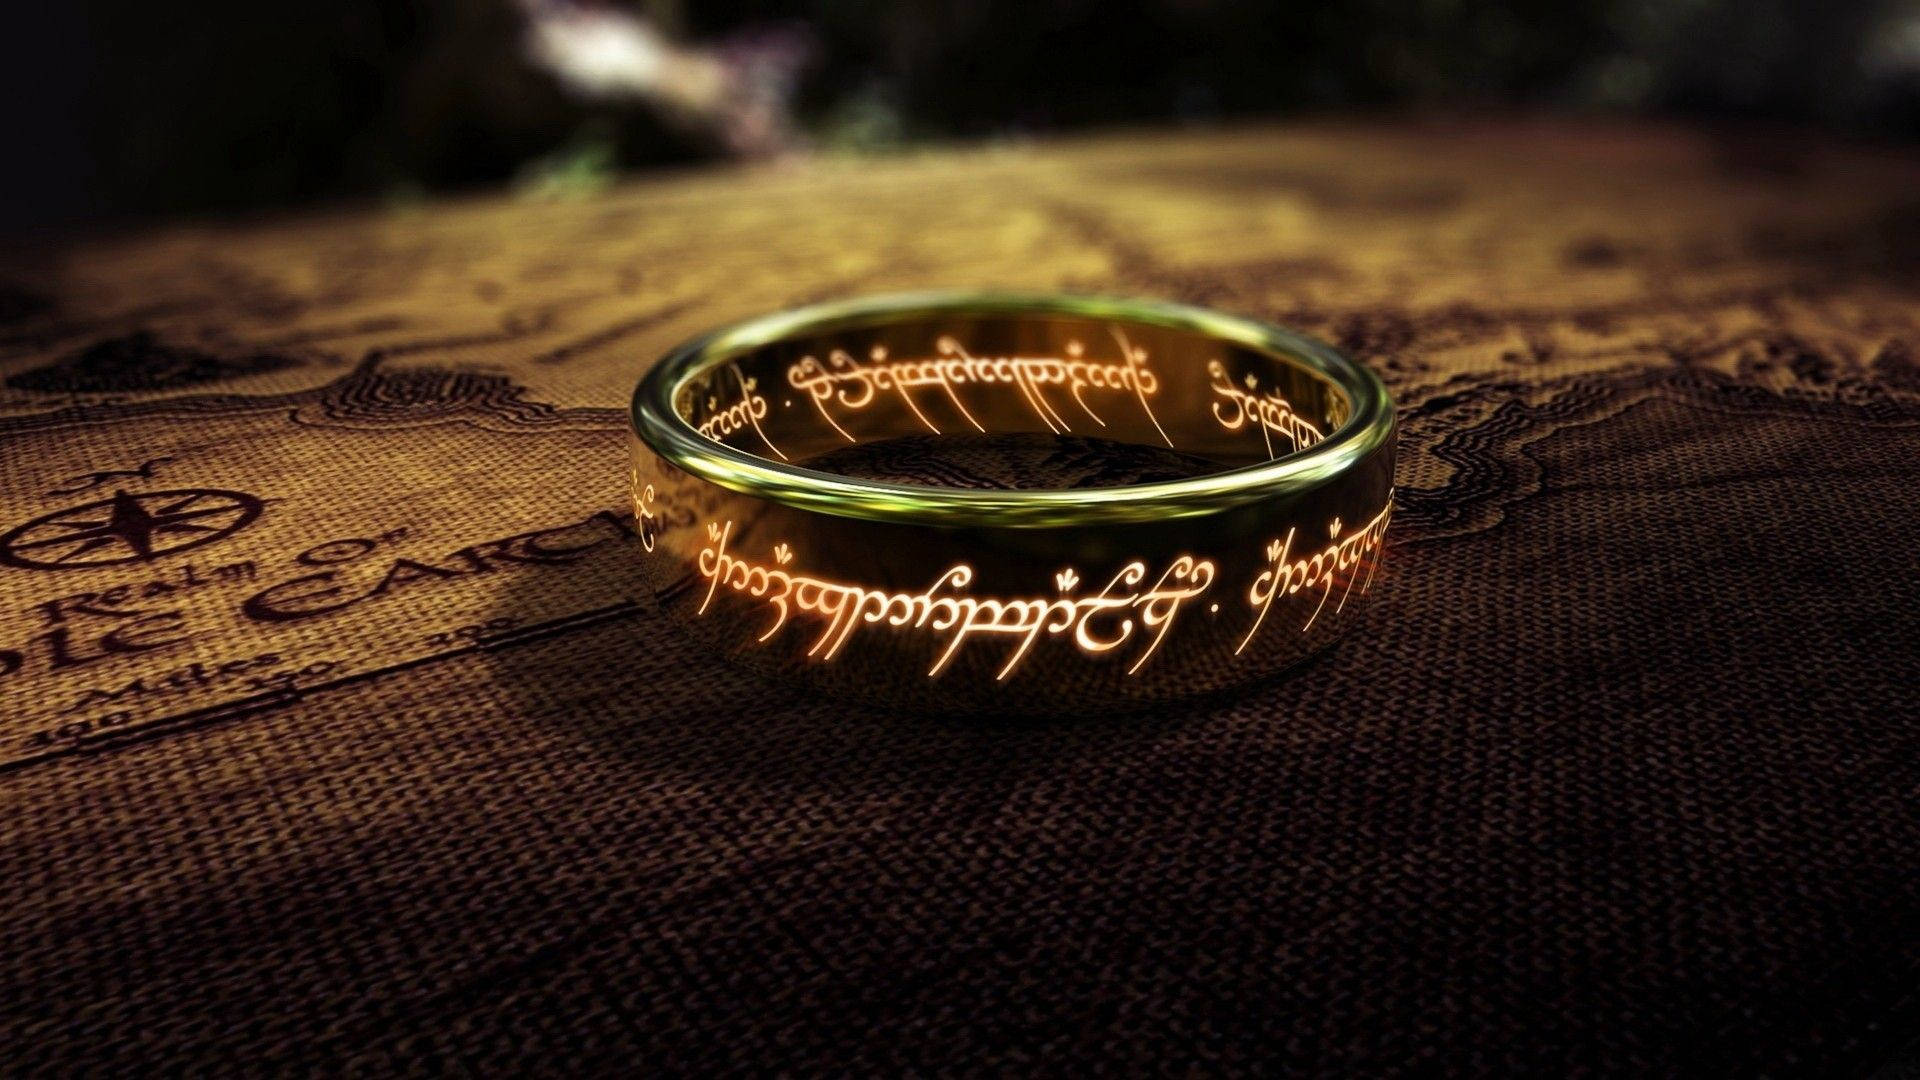 Lord Of The Rings Wallpapers